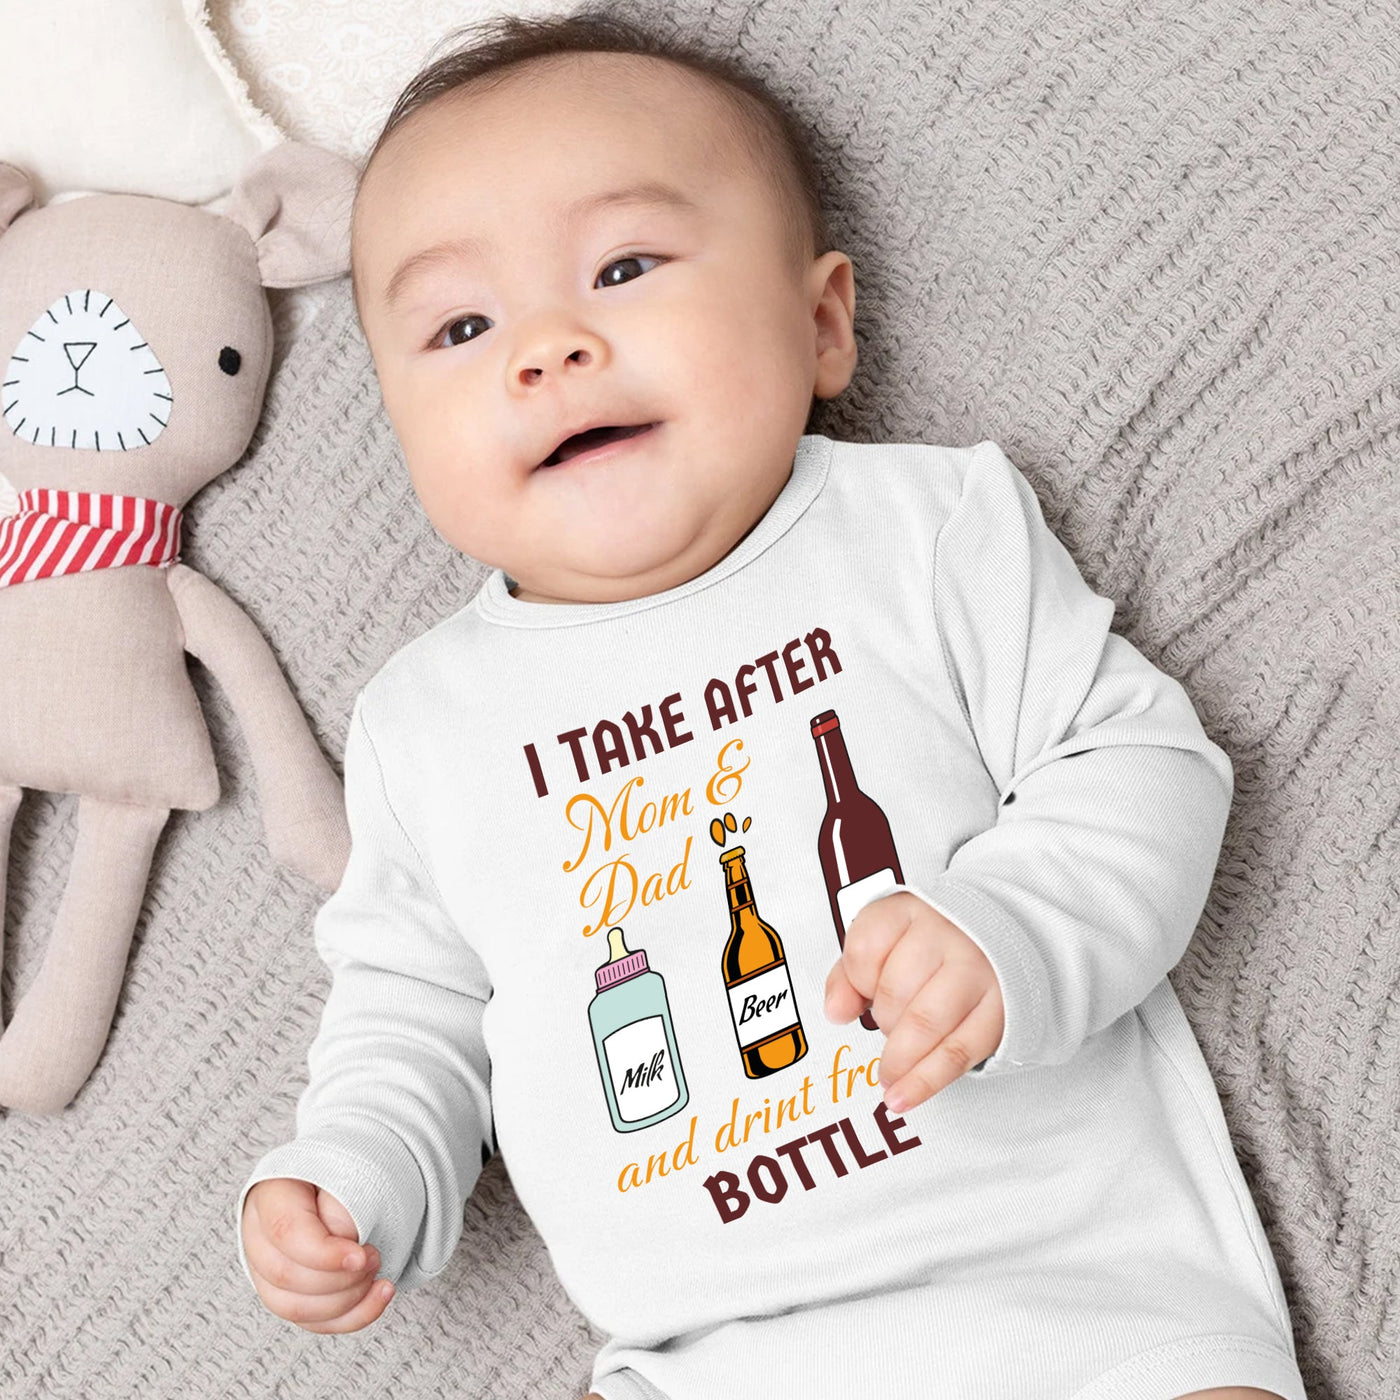 Mom and Dad Drinking, Funny Baby Onesie®, Pregnancy Announcement Baby  Onesie®, Baby Name Onesie®, Personalized Baby Girl Shirt - 0-3 months US  kids